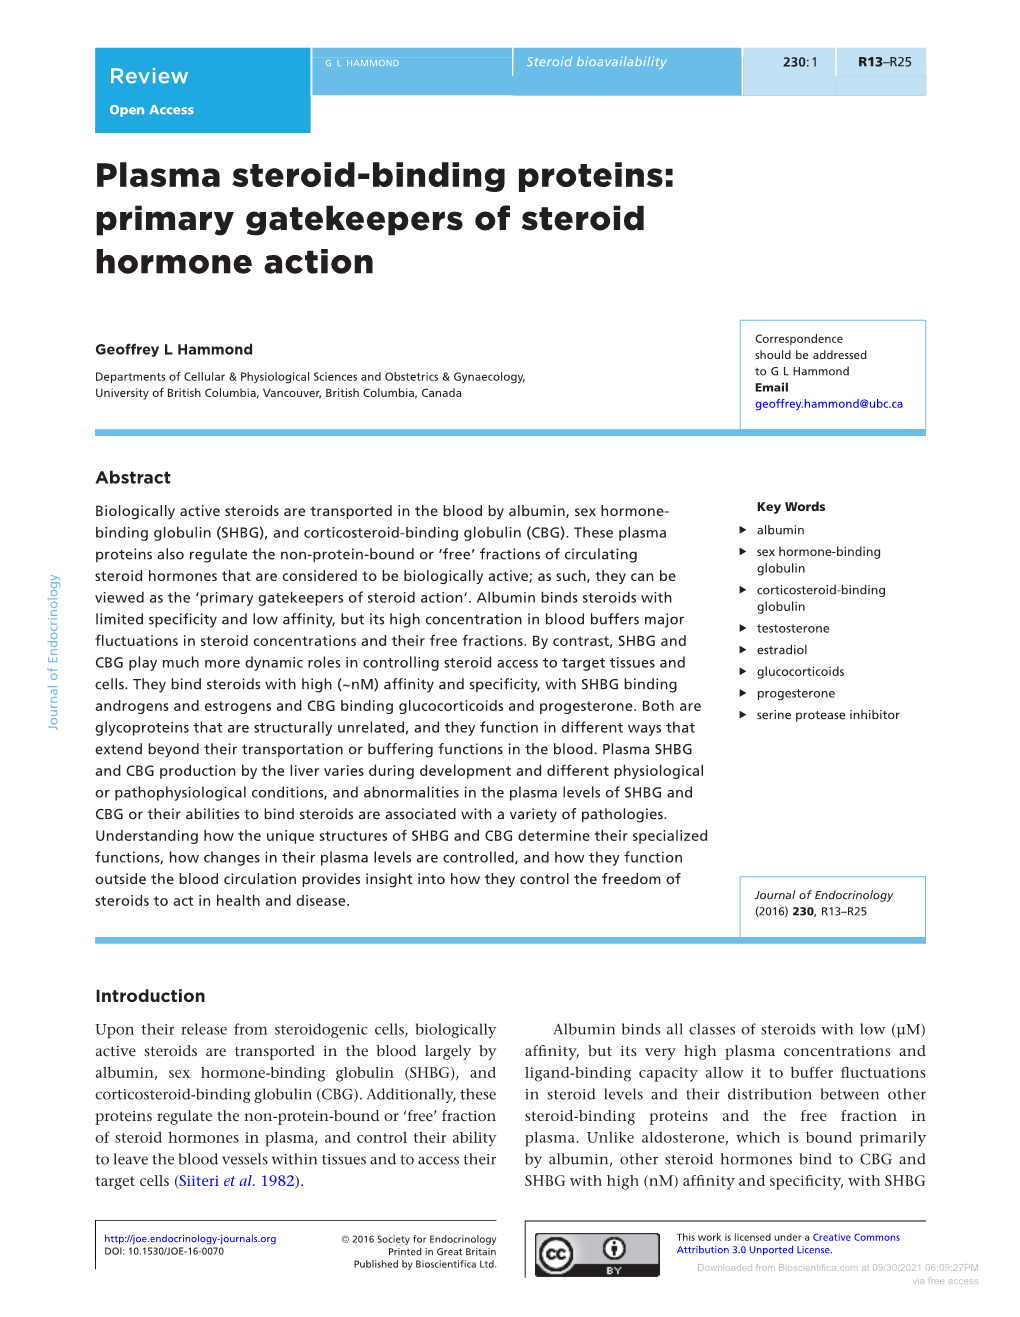 Plasma Steroid-Binding Proteins: Primary Gatekeepers of Steroid Hormone Action